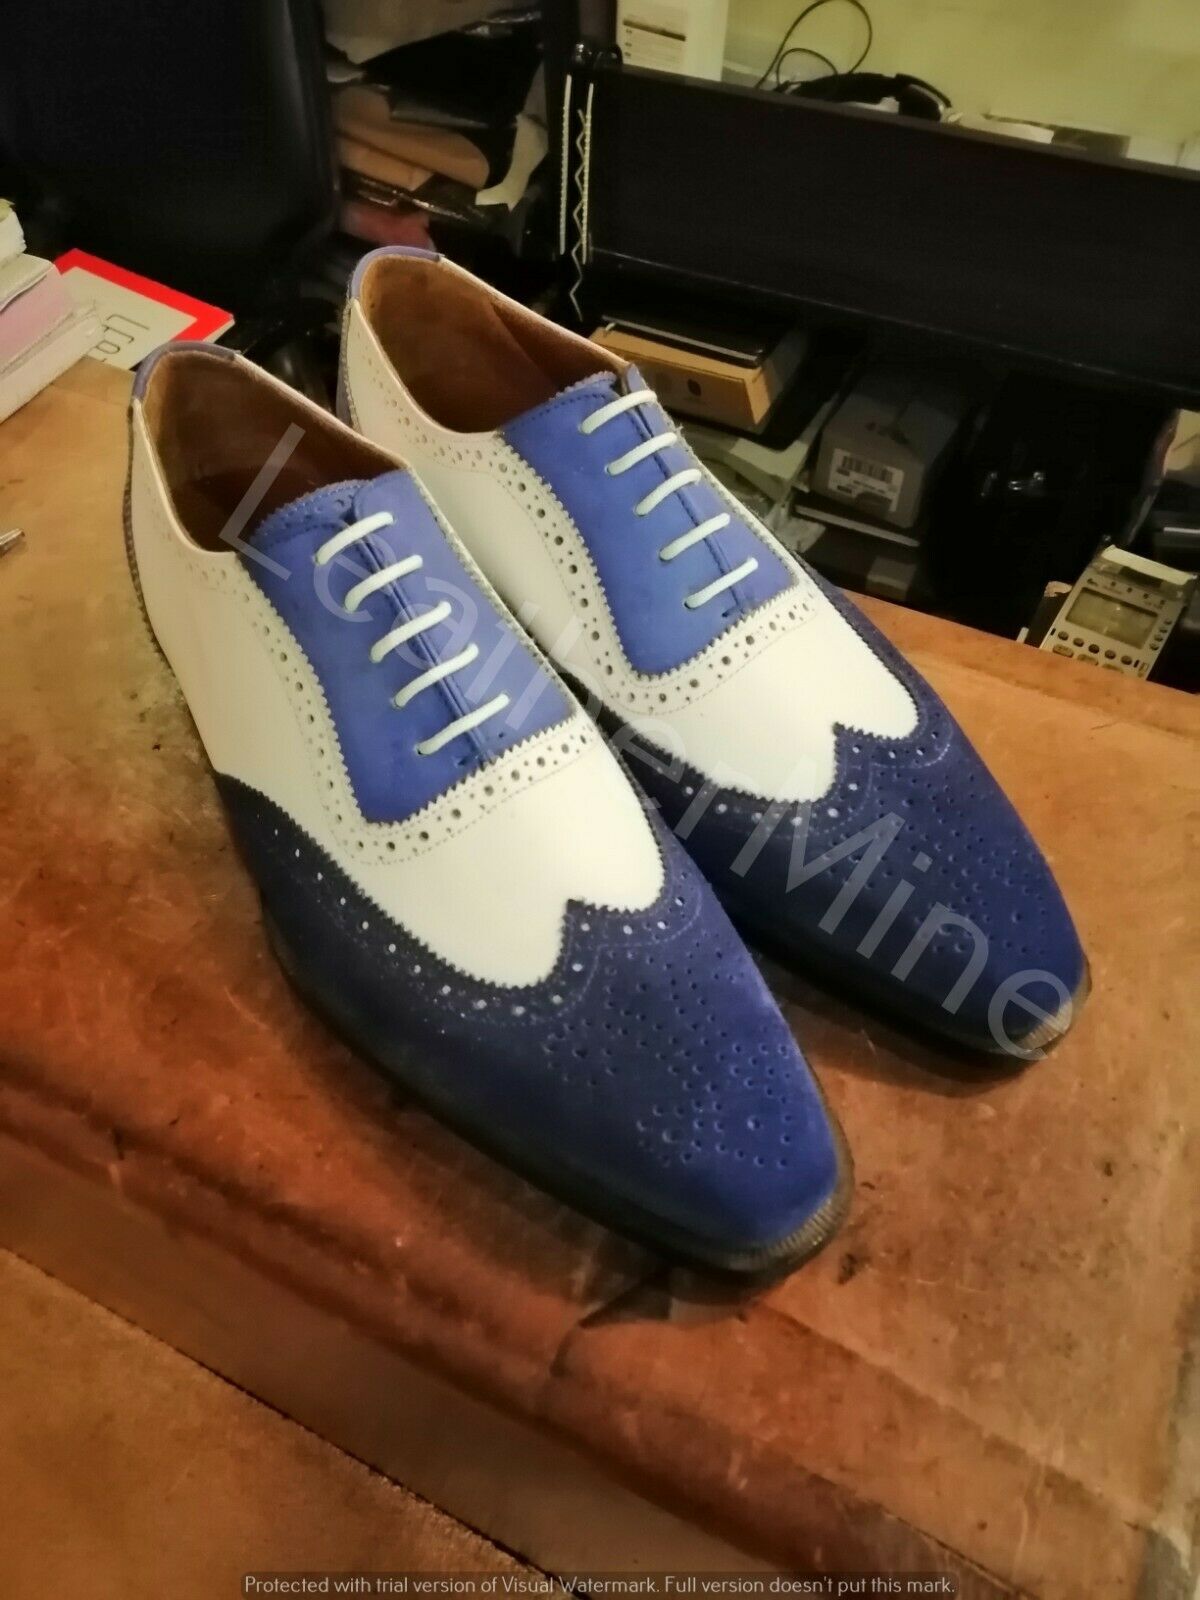 Men's Handmade Leather Shoes Two Tone Spectator Shoes, Blue Leather Men's Shoes